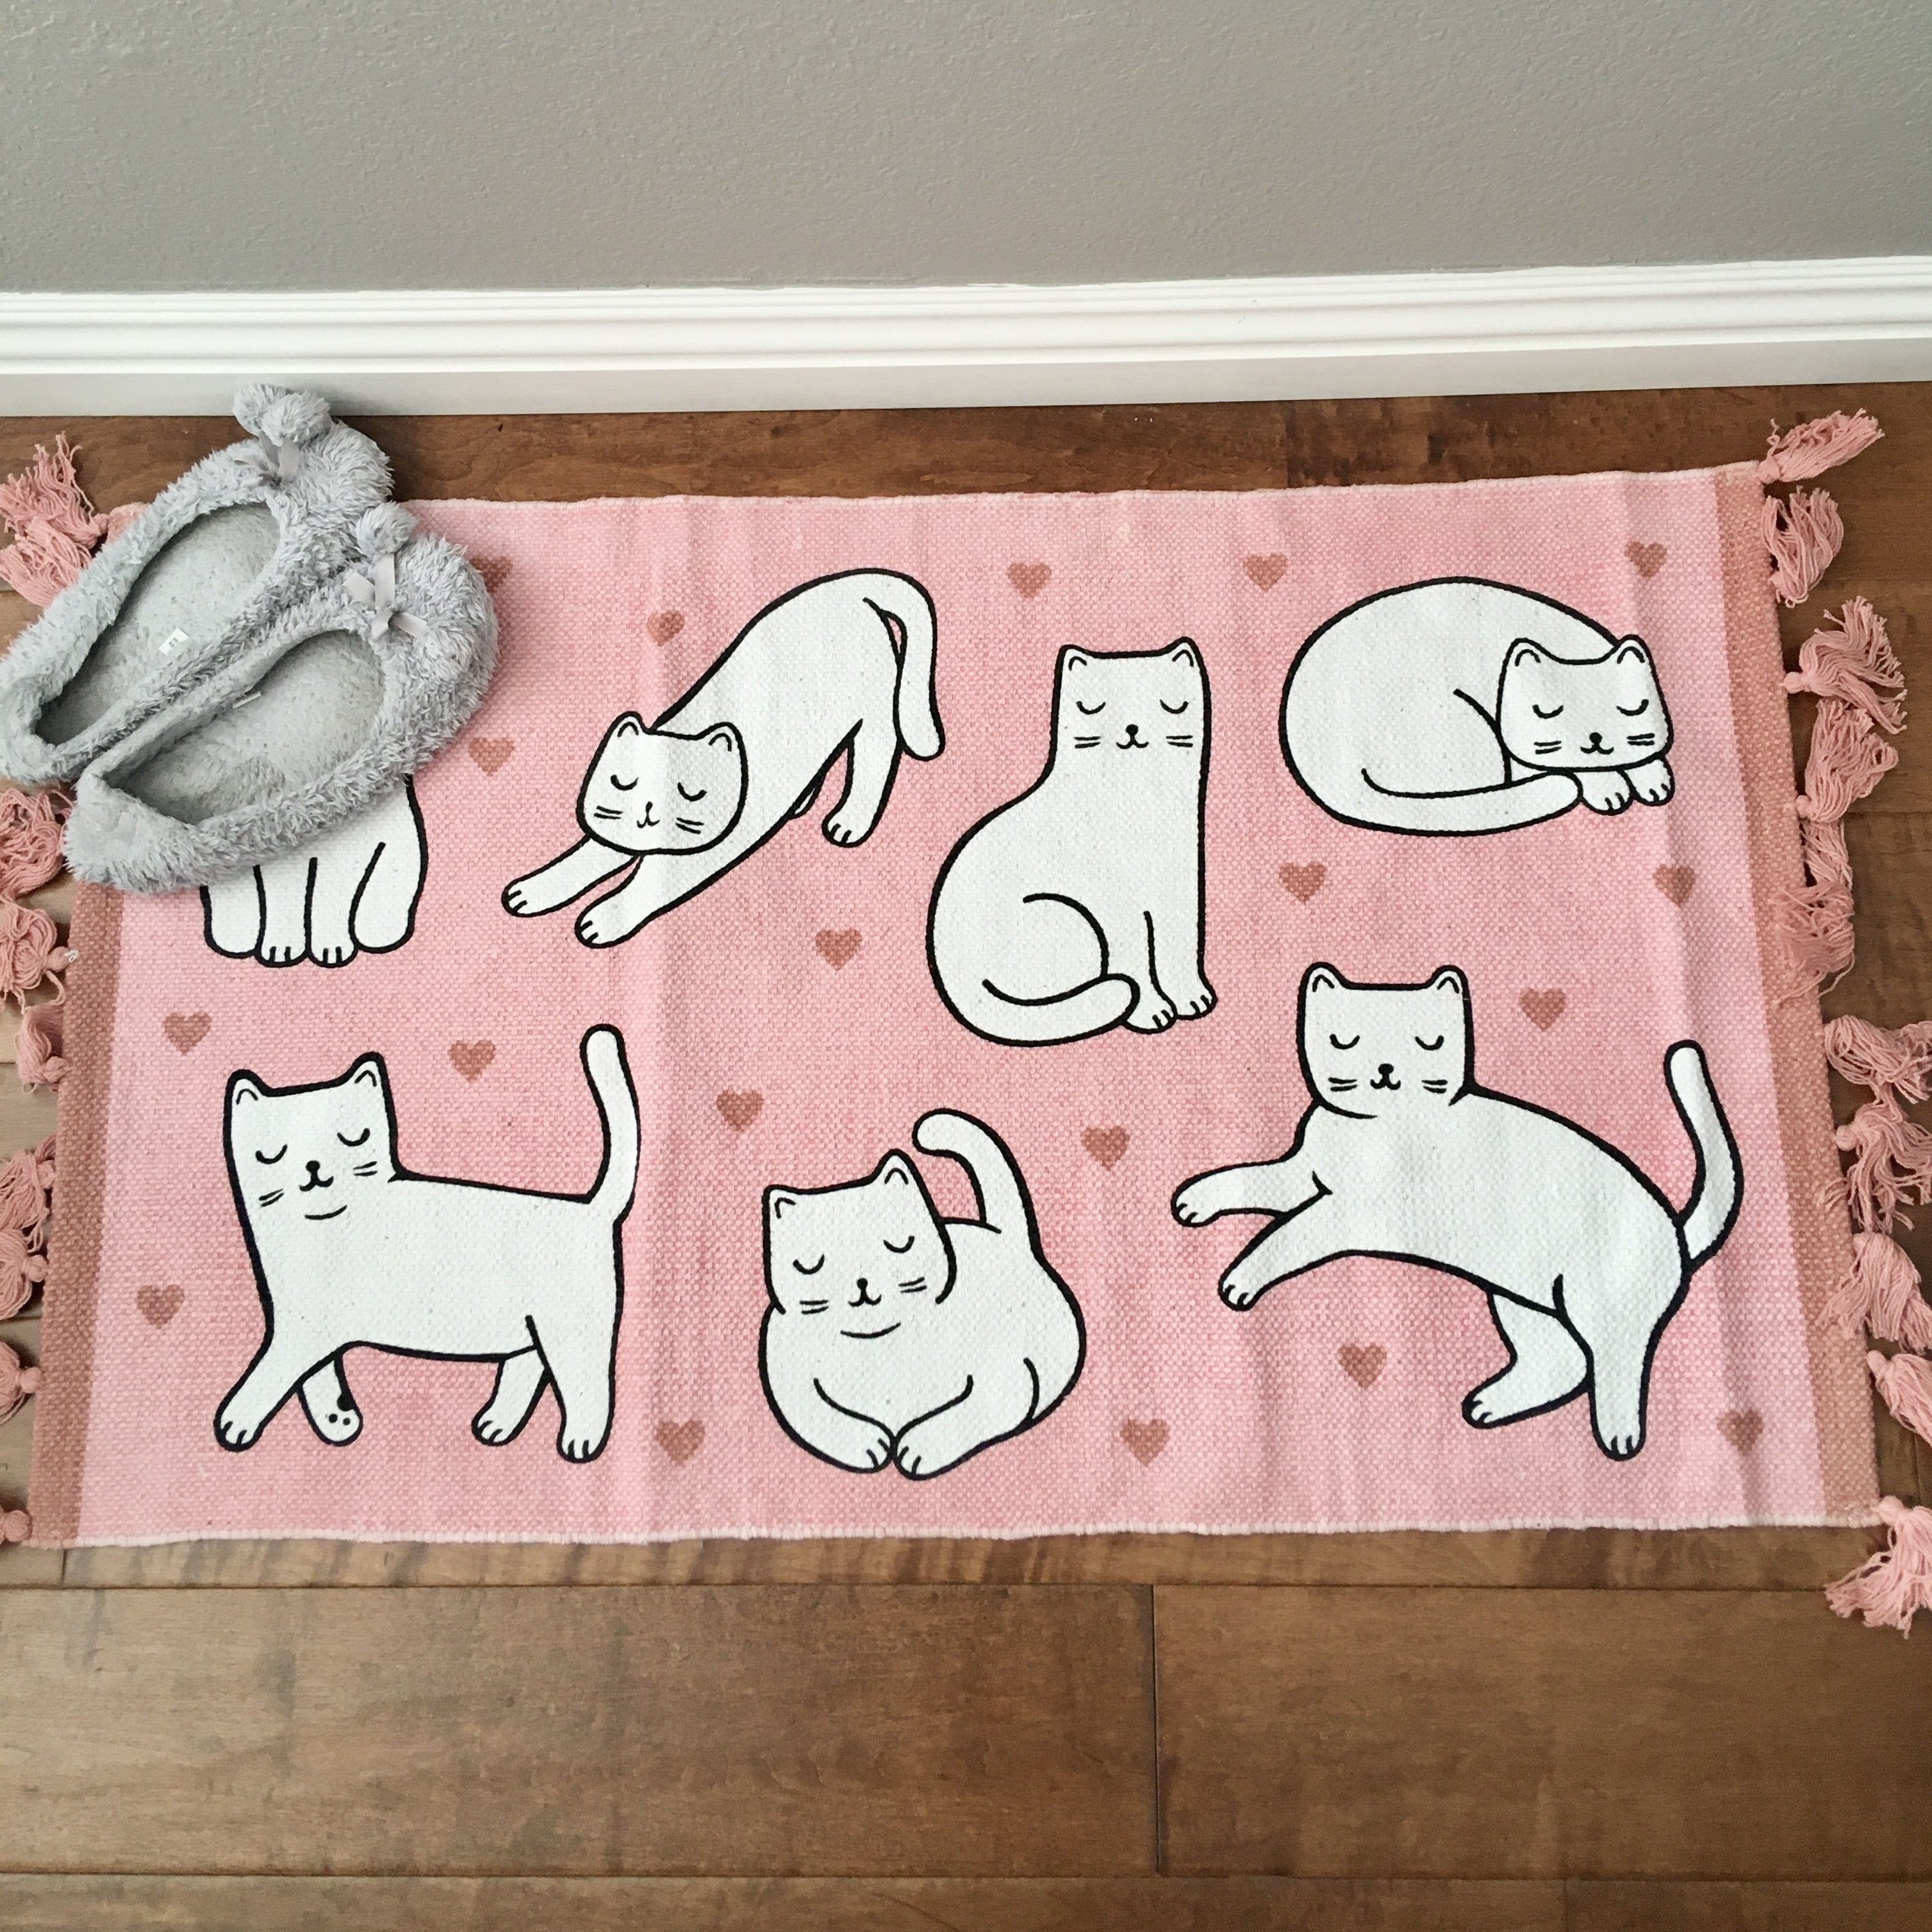 Cat Inspired Home Decor, Rugs With Cats On Them, White Cat Rug